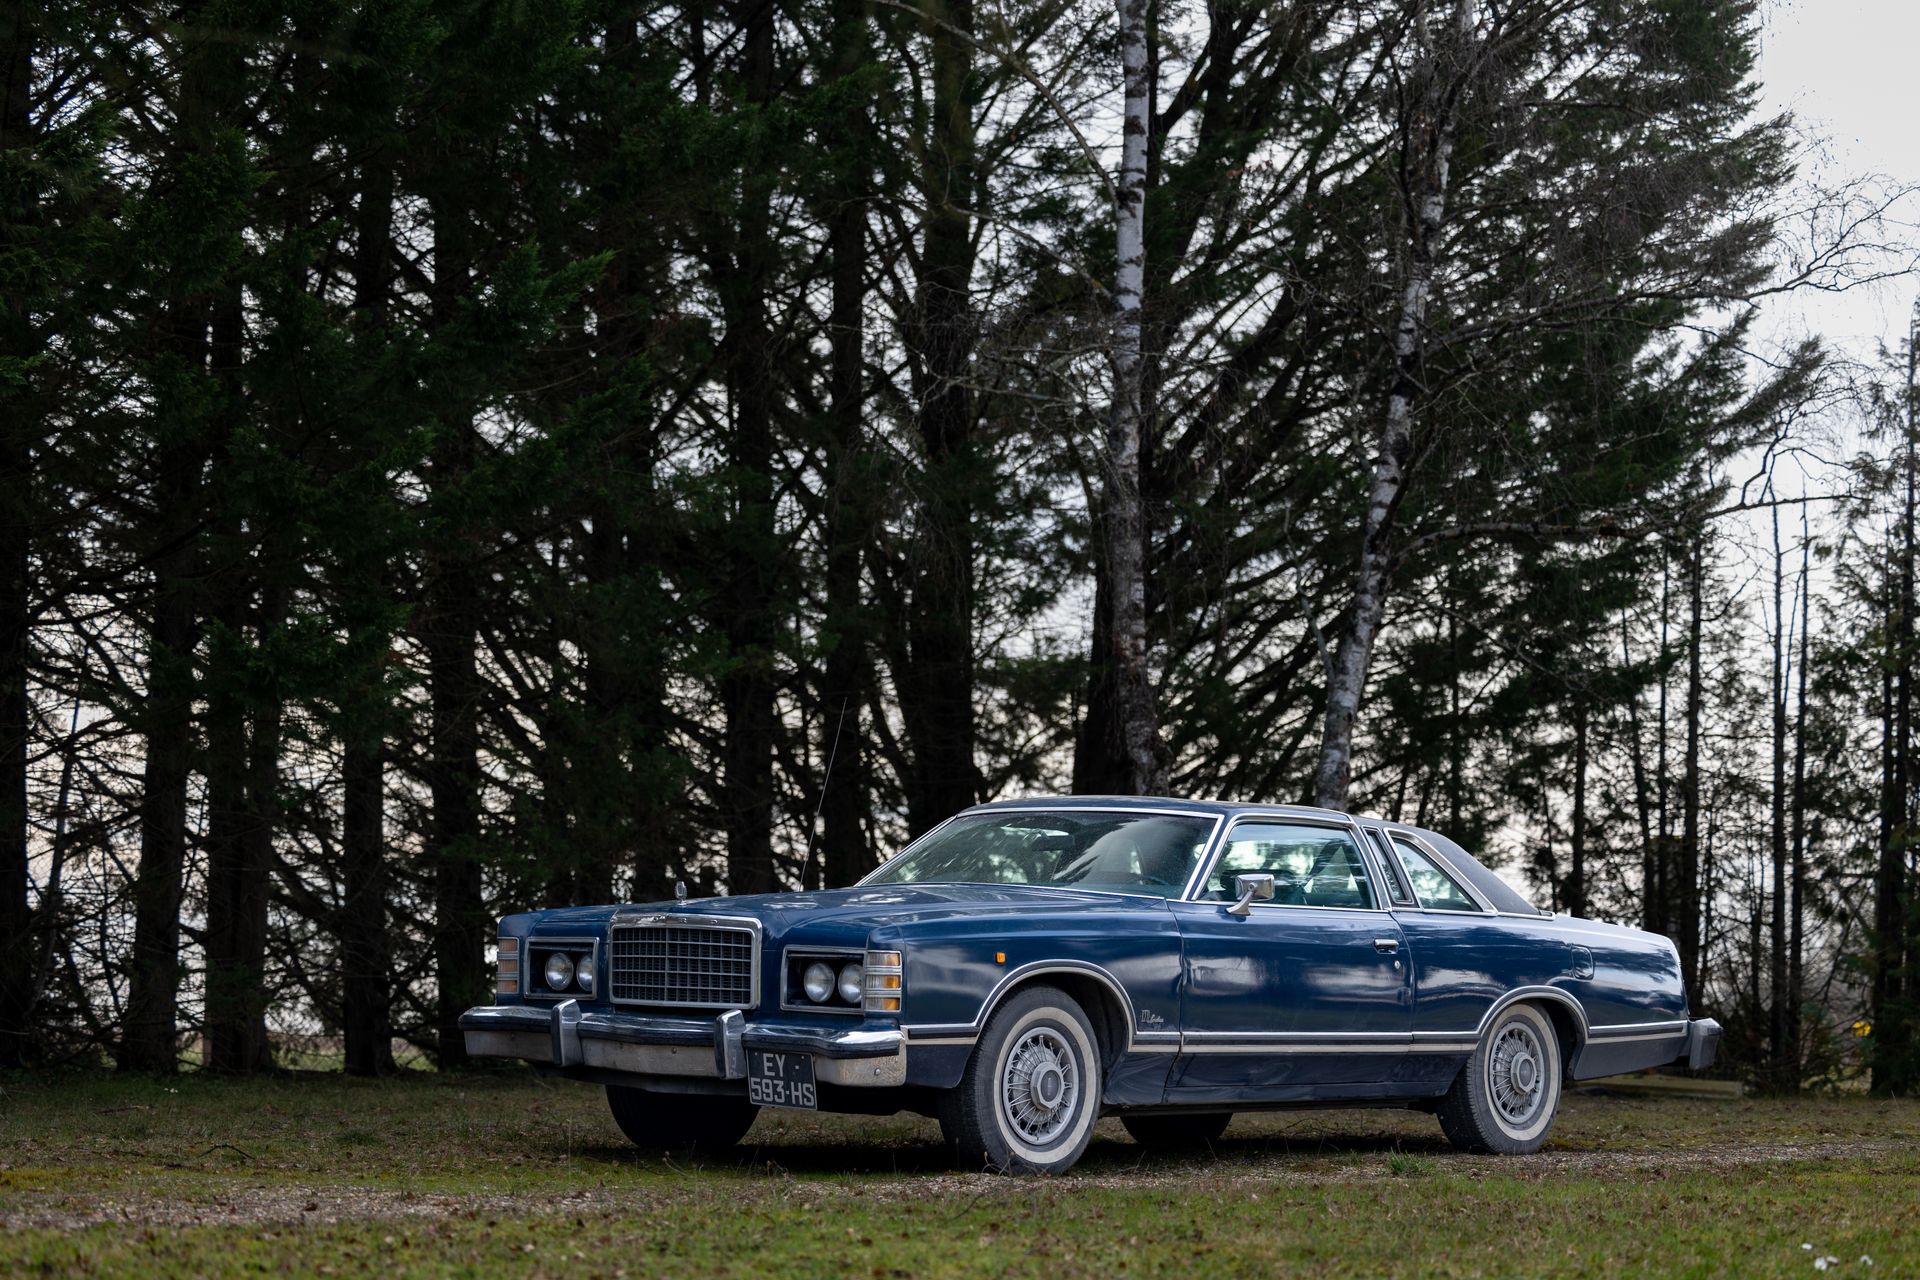 Null 1978 Ford LTD Coupe
Serial number: 8B64H157105
Last true full size Ford
Col&hellip;